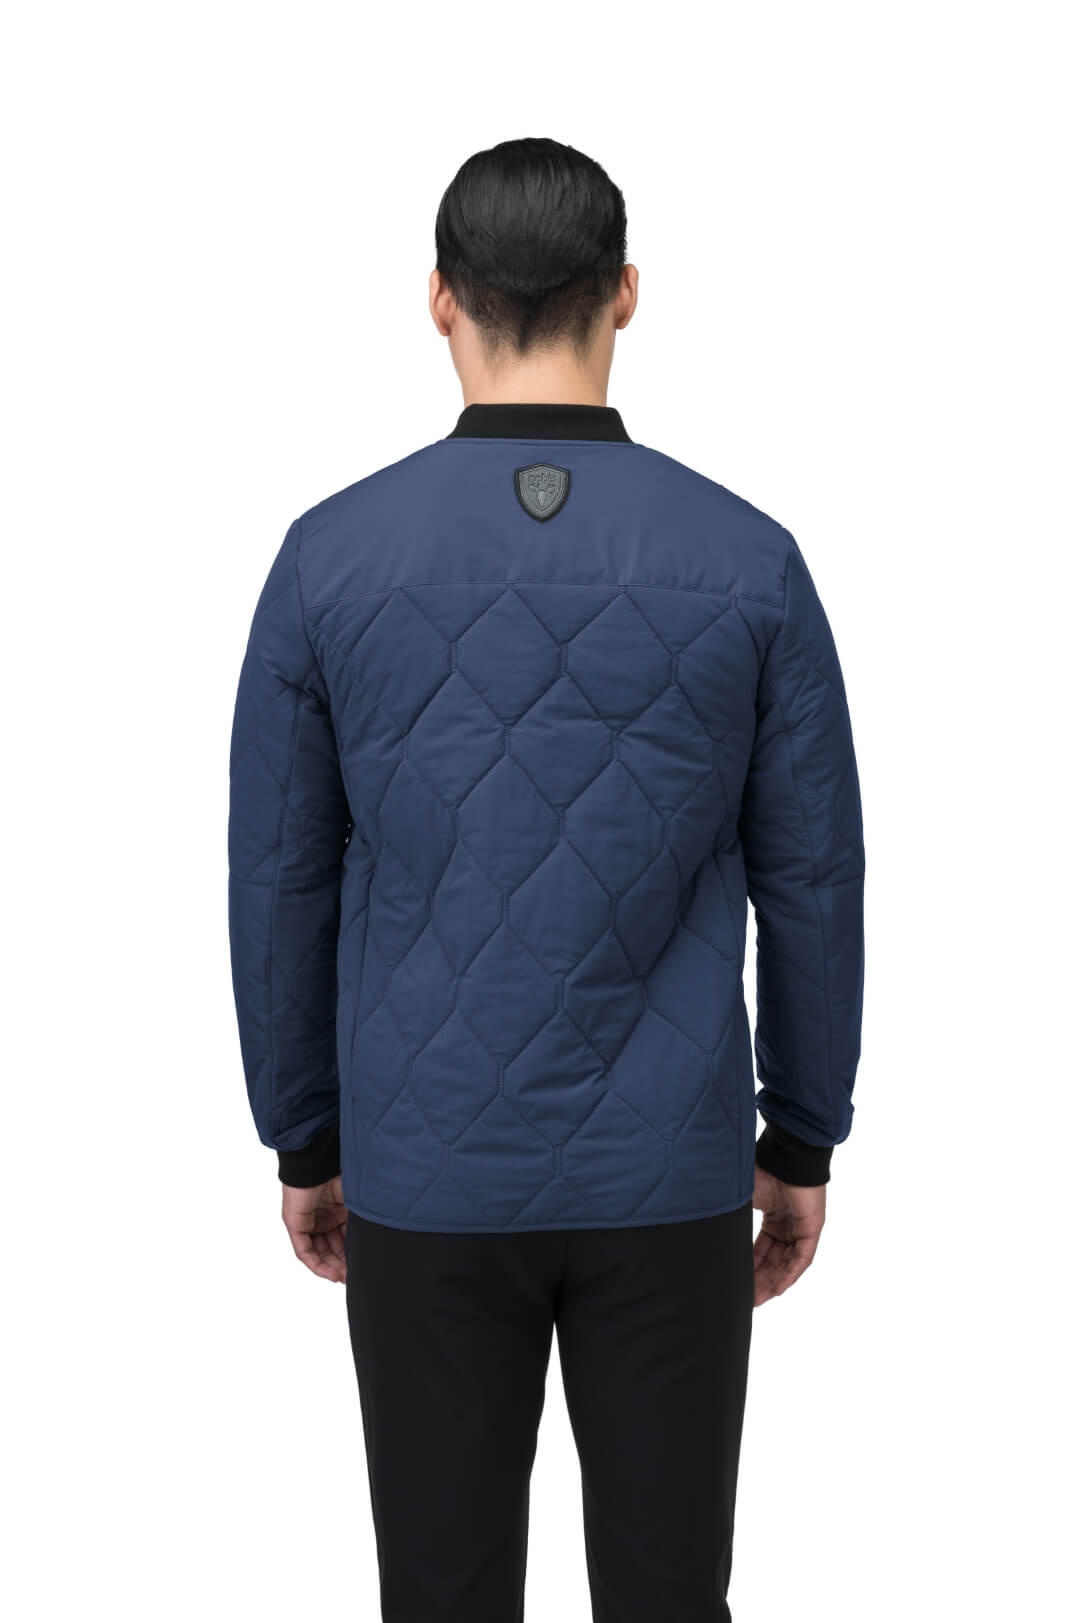 Speck Men's Tailored Mid Layer Jacket in hip length, Primaloft Gold Insulation Active+, diamond quilted body, rib knit collar and cuffs, snap buton front closure, and hidden side-entry zipper pockets at waist, in Blueprint